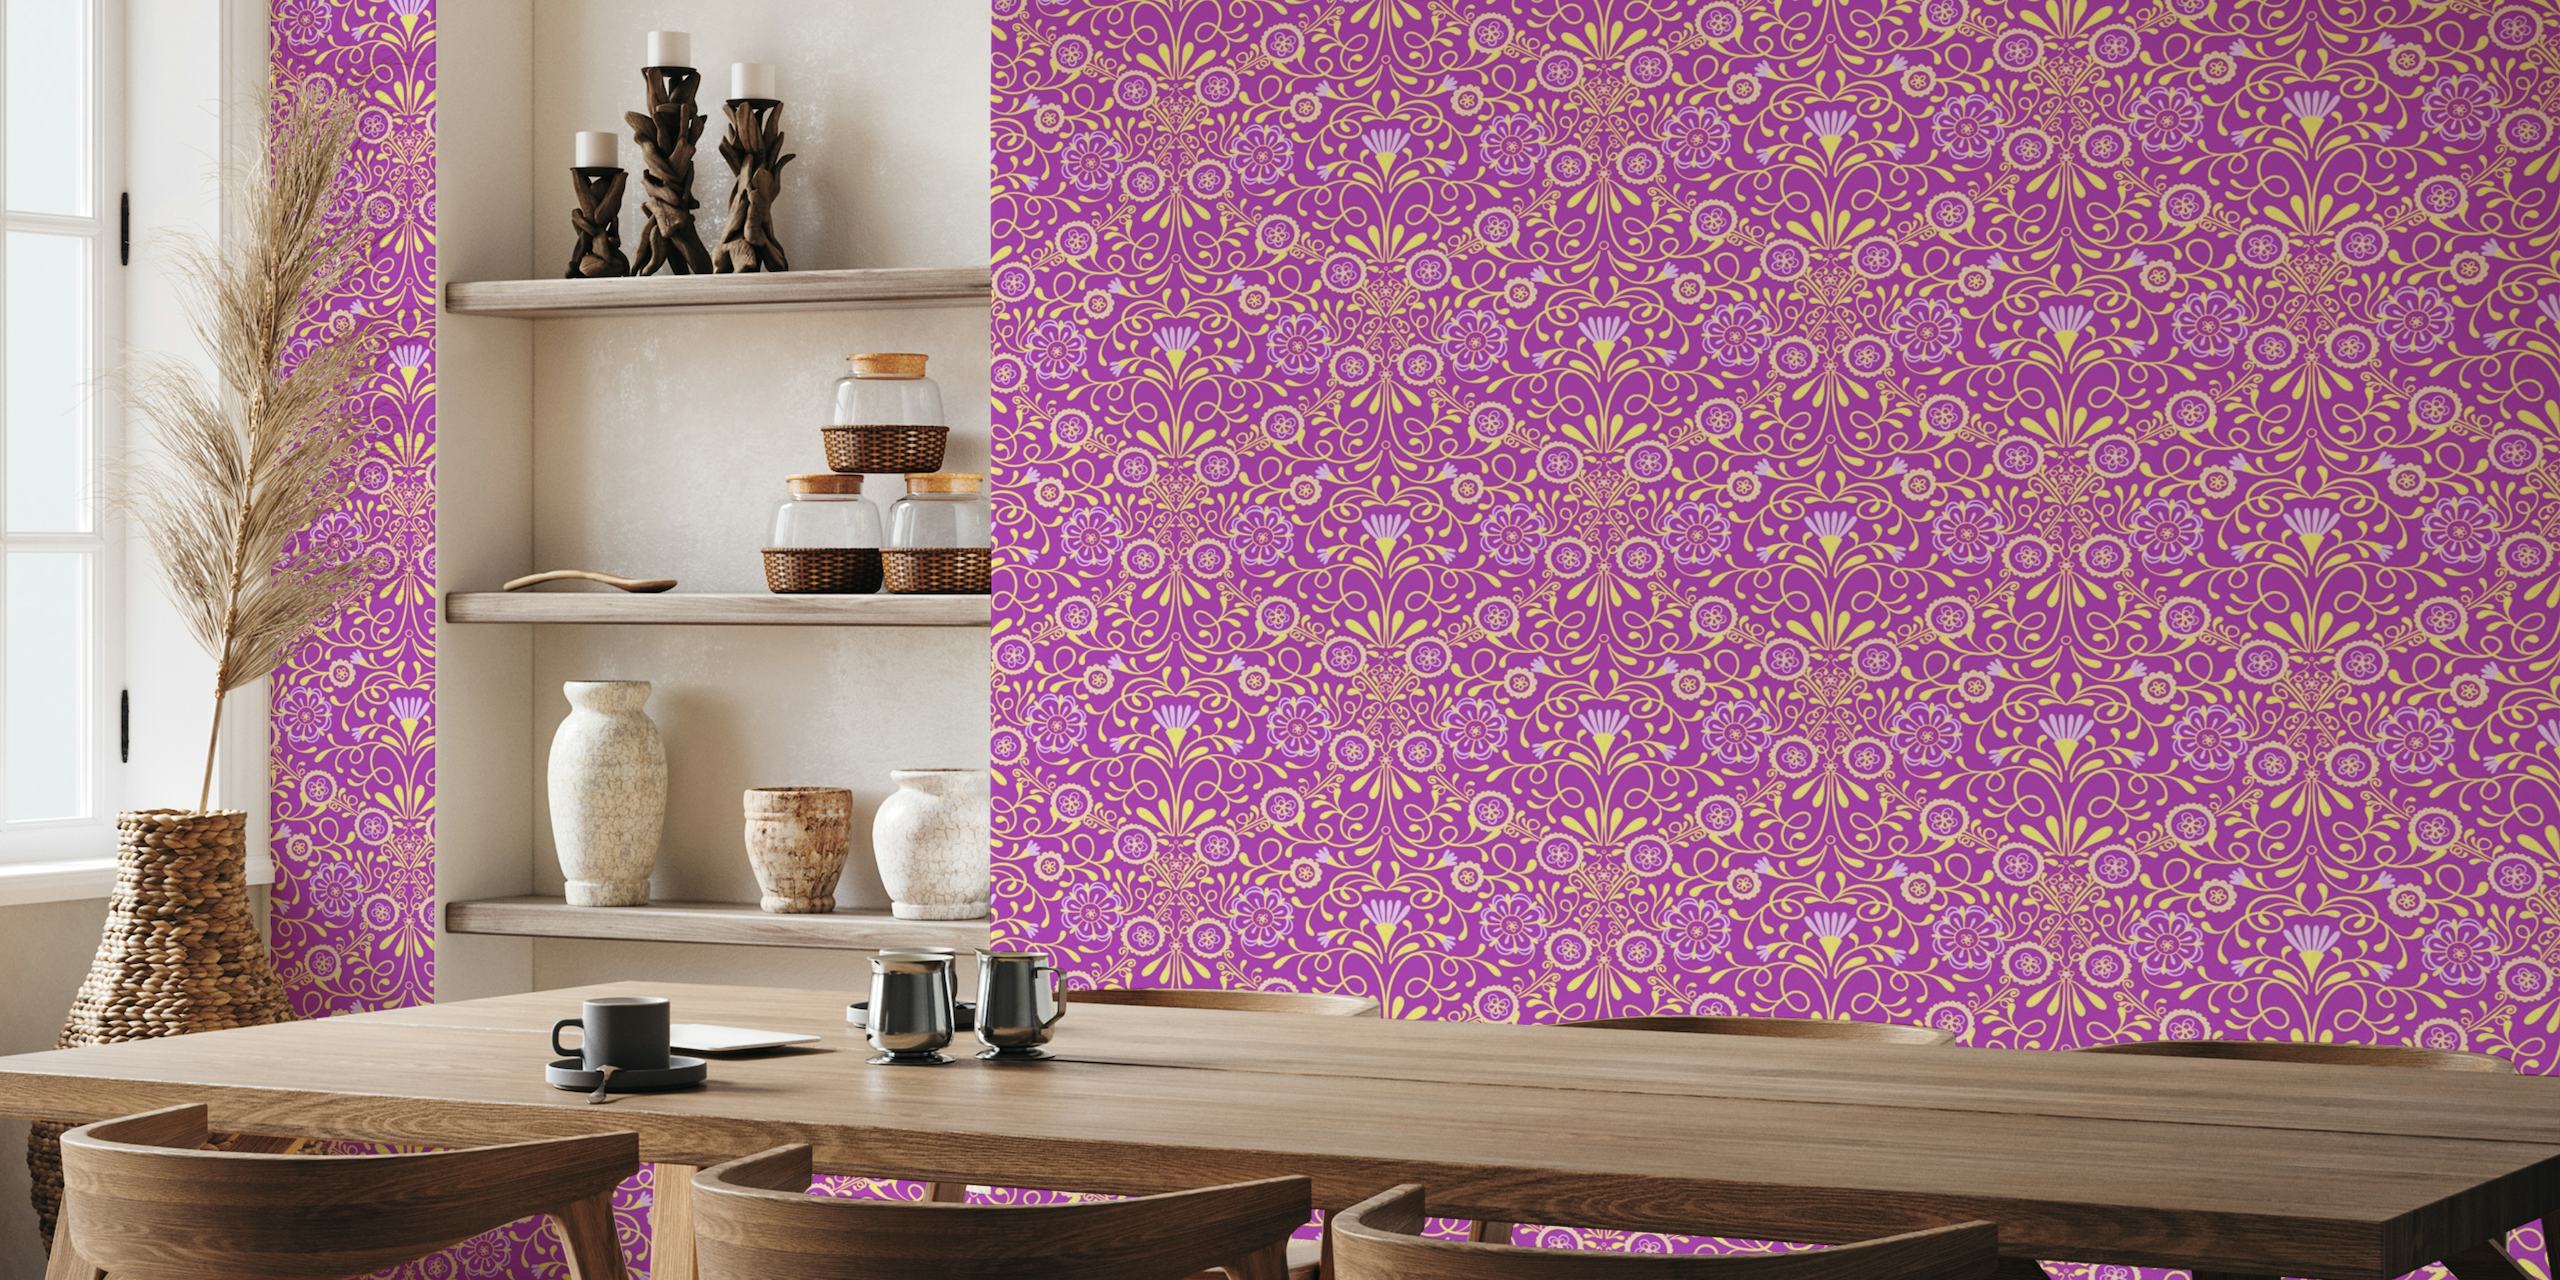 Tuscan Tile in Magenta, Yellow, and Purple tapetit